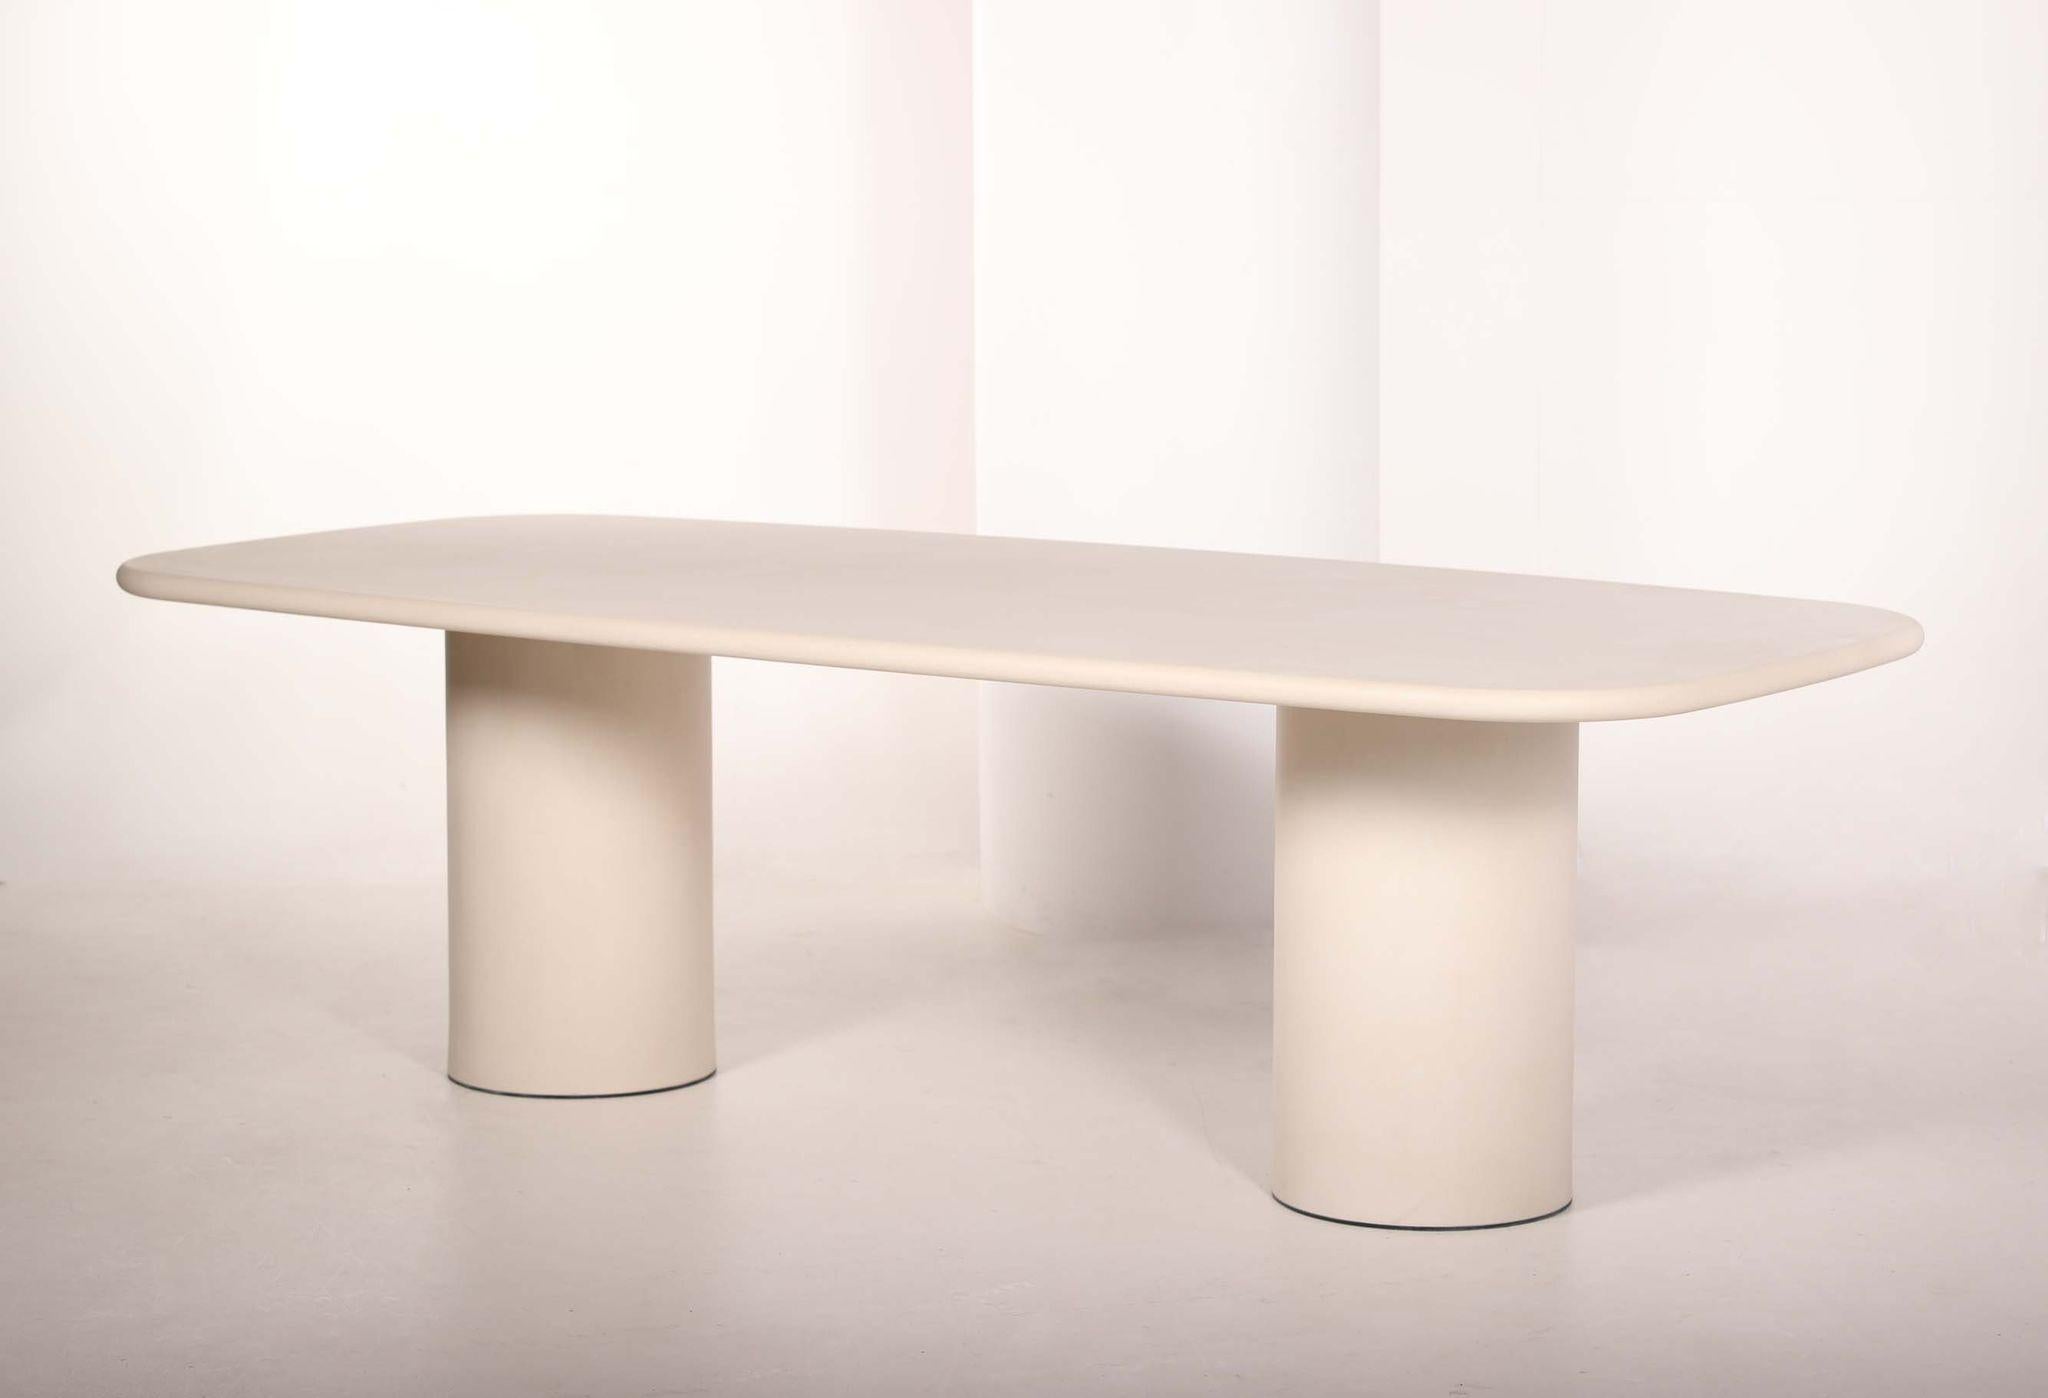 Contemporary Barrel Shape Table by Galerie Philia Edition